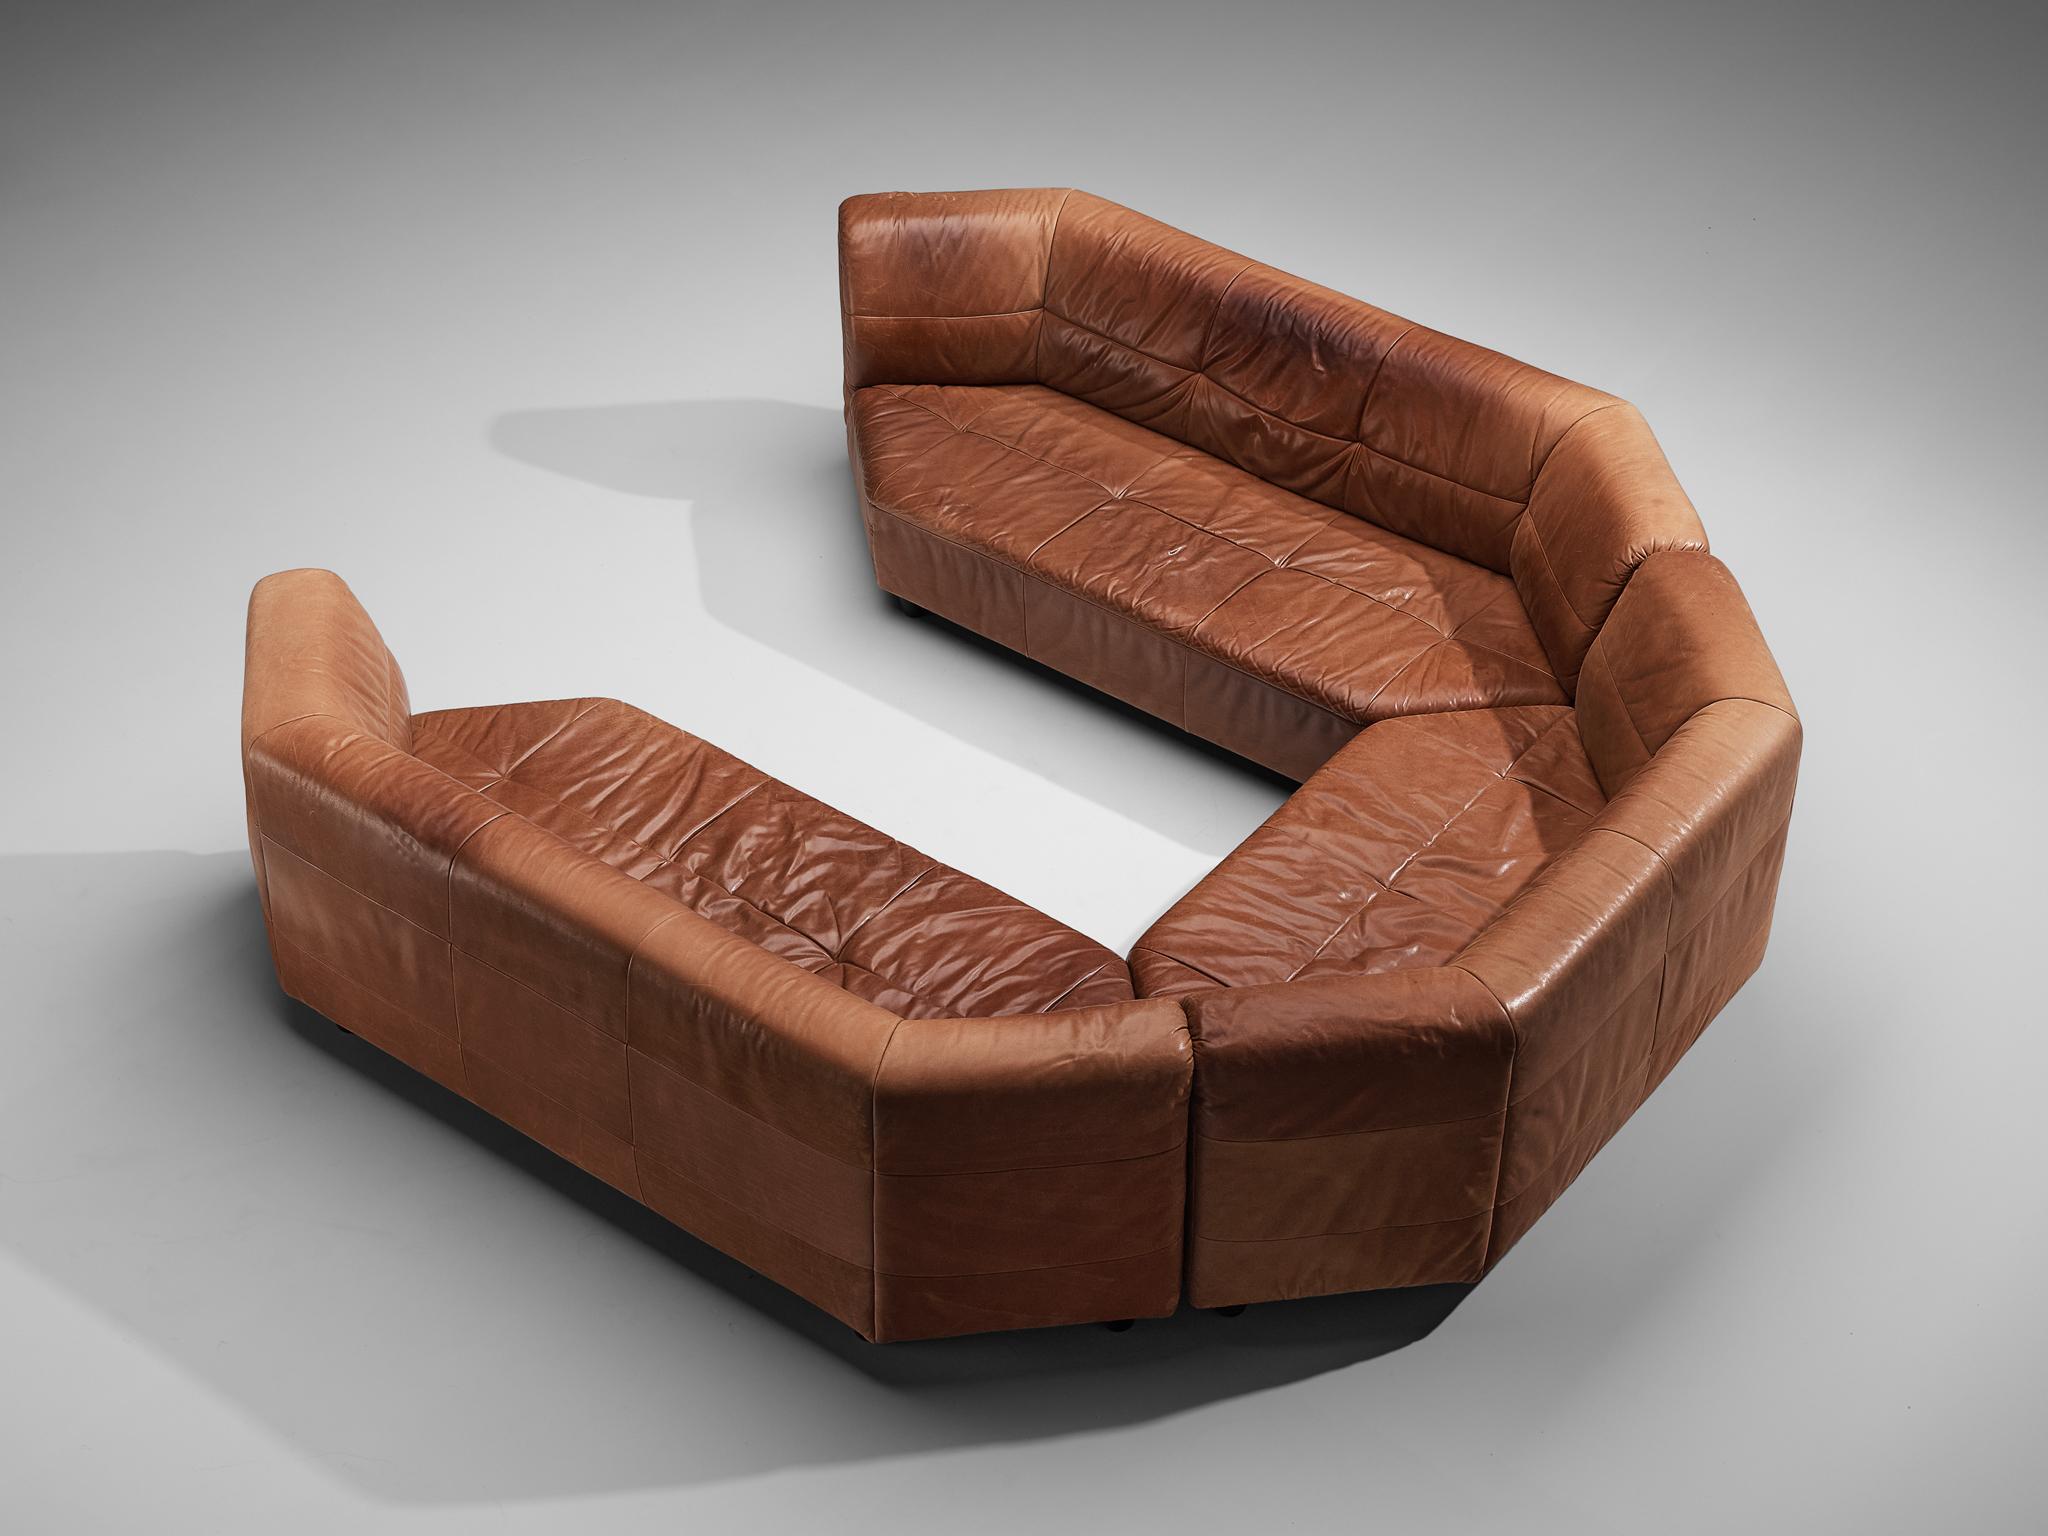 Modular sofa, leather, wood, Europe, 1970s.

This well-designed sofa is executed in brown leather with patina that gives the sofa a lively and robust look. This sofa is characterized by a splendid construction consisting of three pieces in the shape